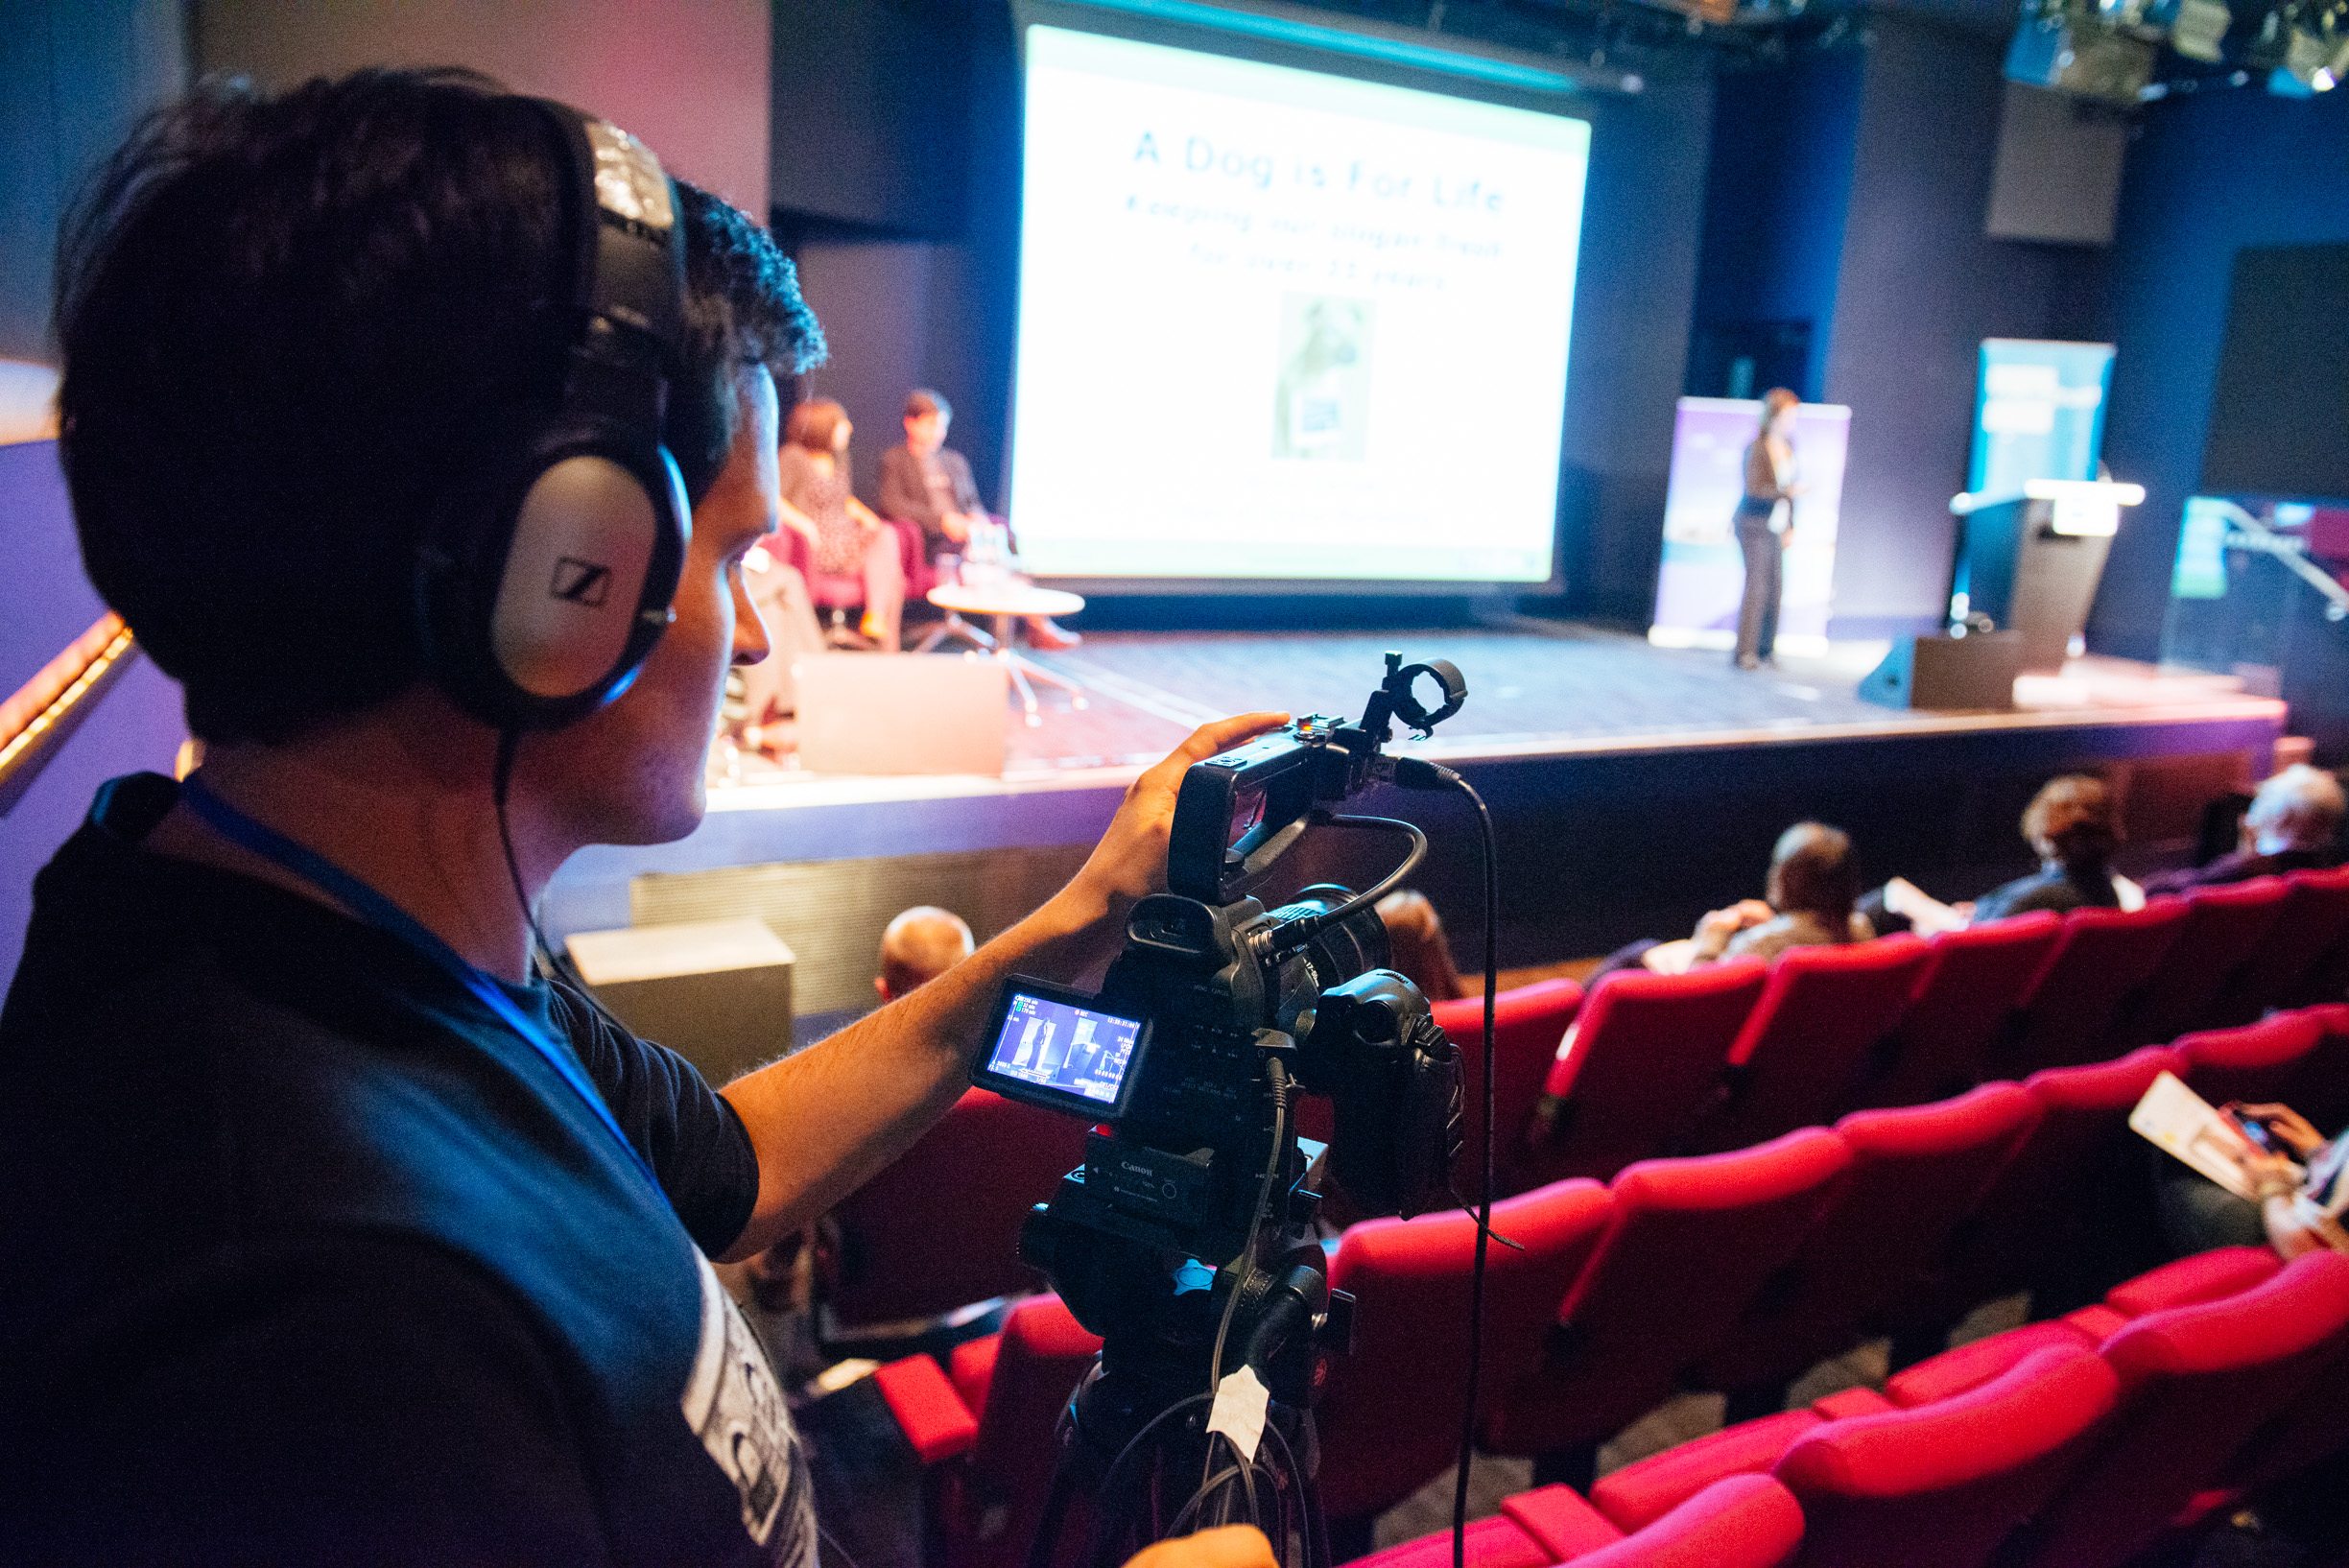 Cameraman filming at a conference